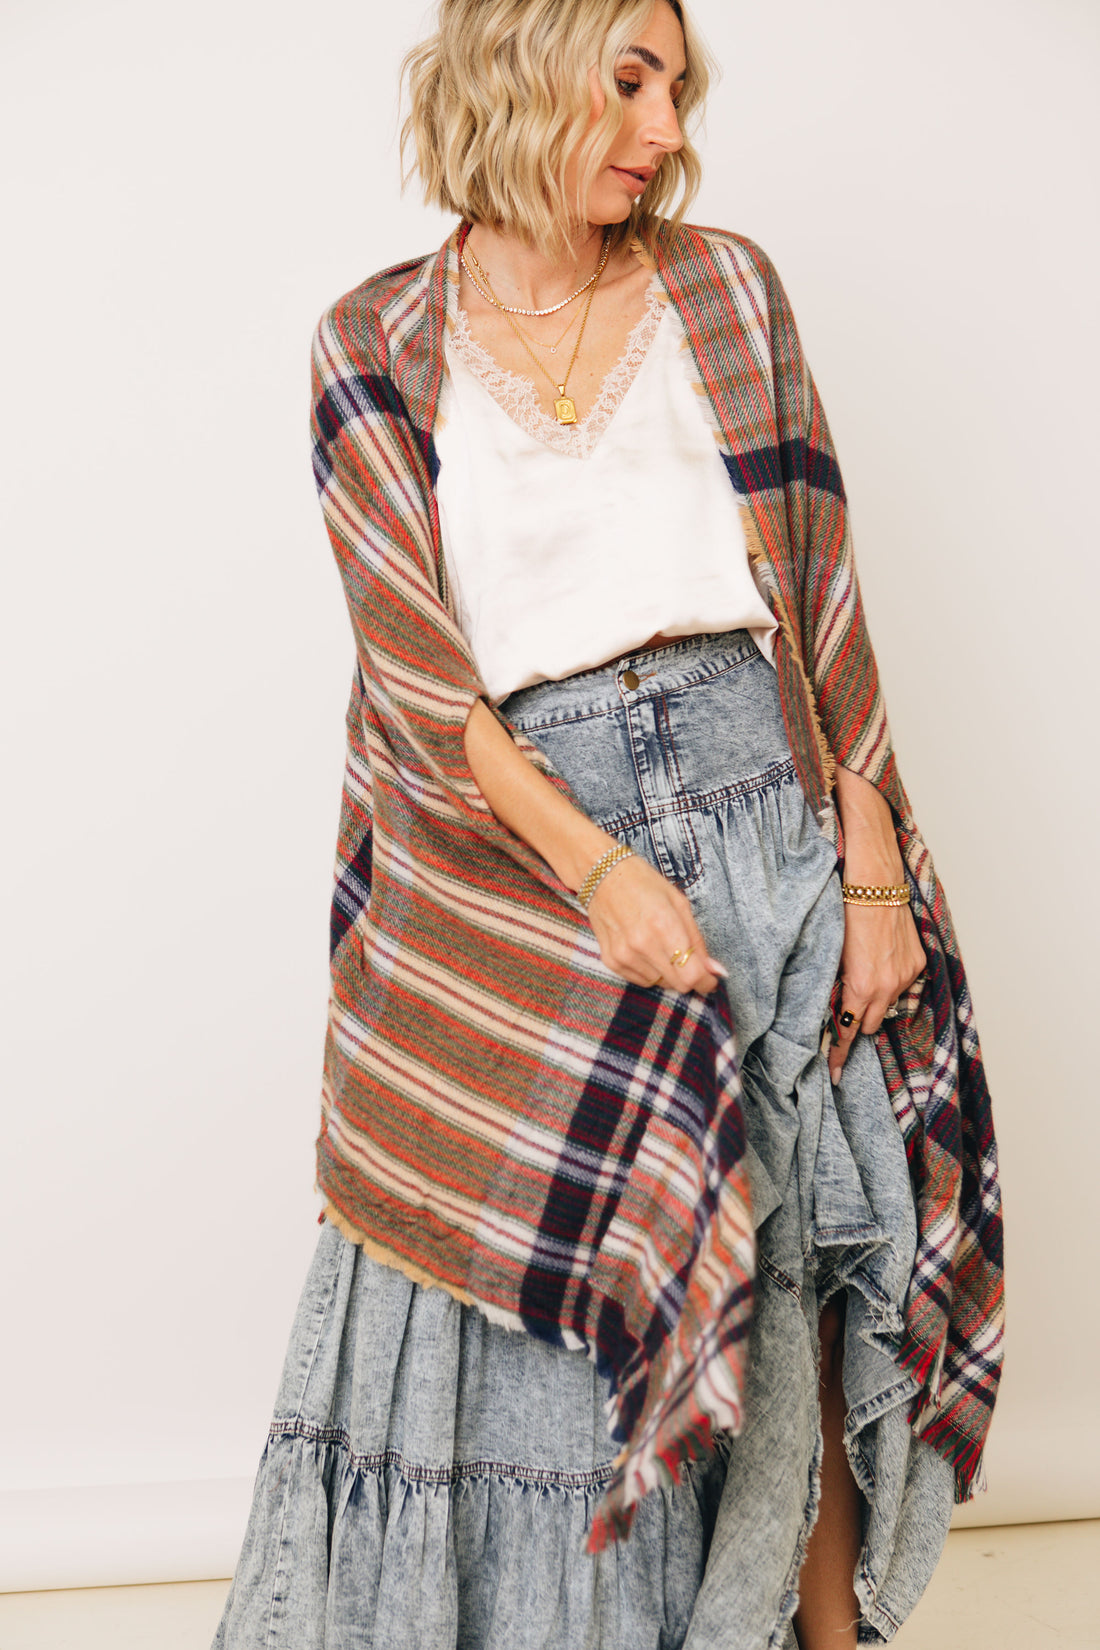 Wrapped In Plaid - Plaid Fringed Ruana (S-3XL)